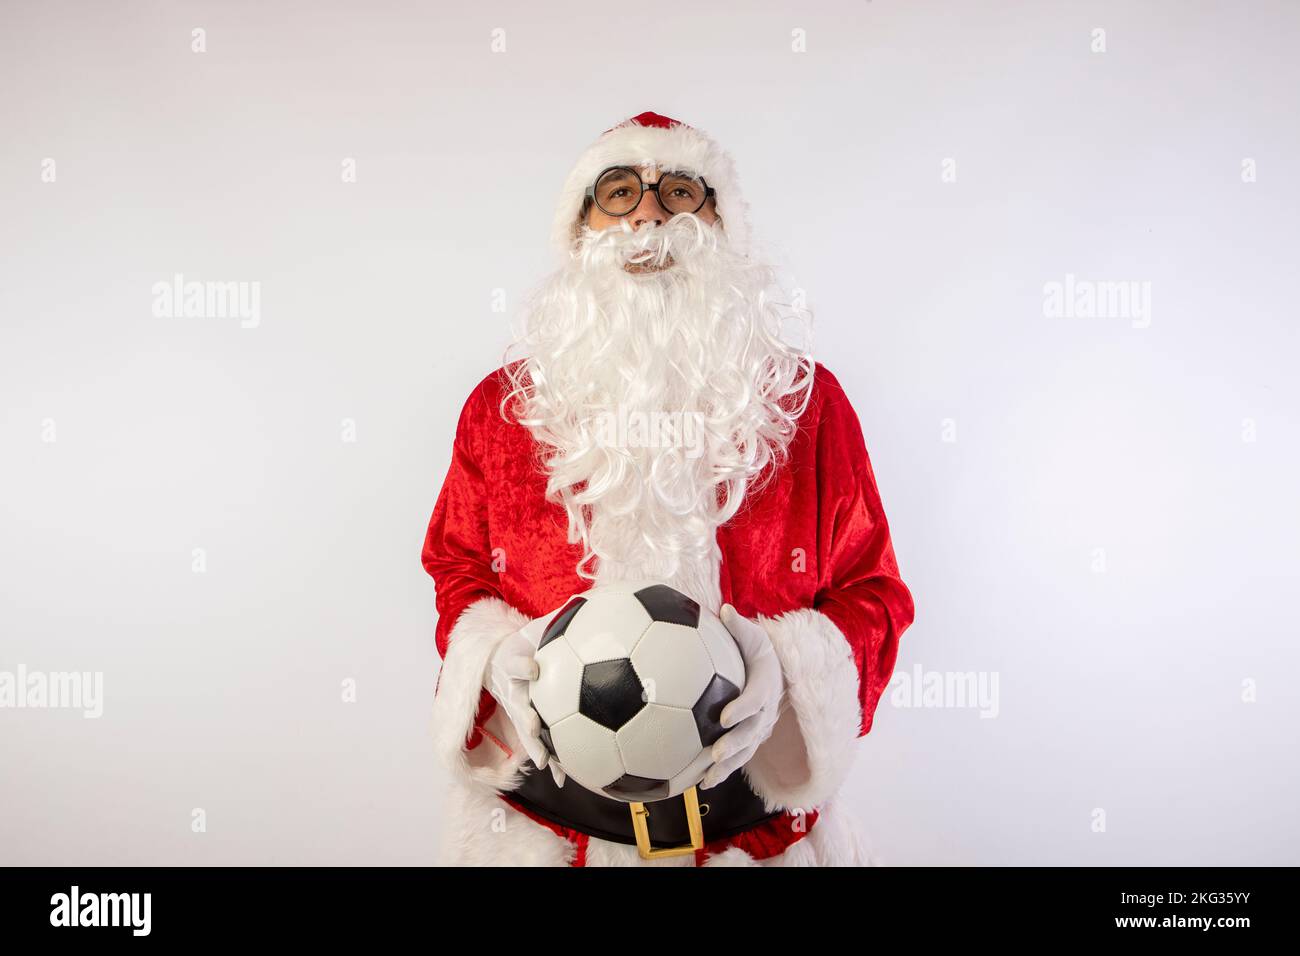 Santa Claus with glasses holding a World Cup soccer ball as a gift for all children, with a white background where his red suit and white beard stand Stock Photo